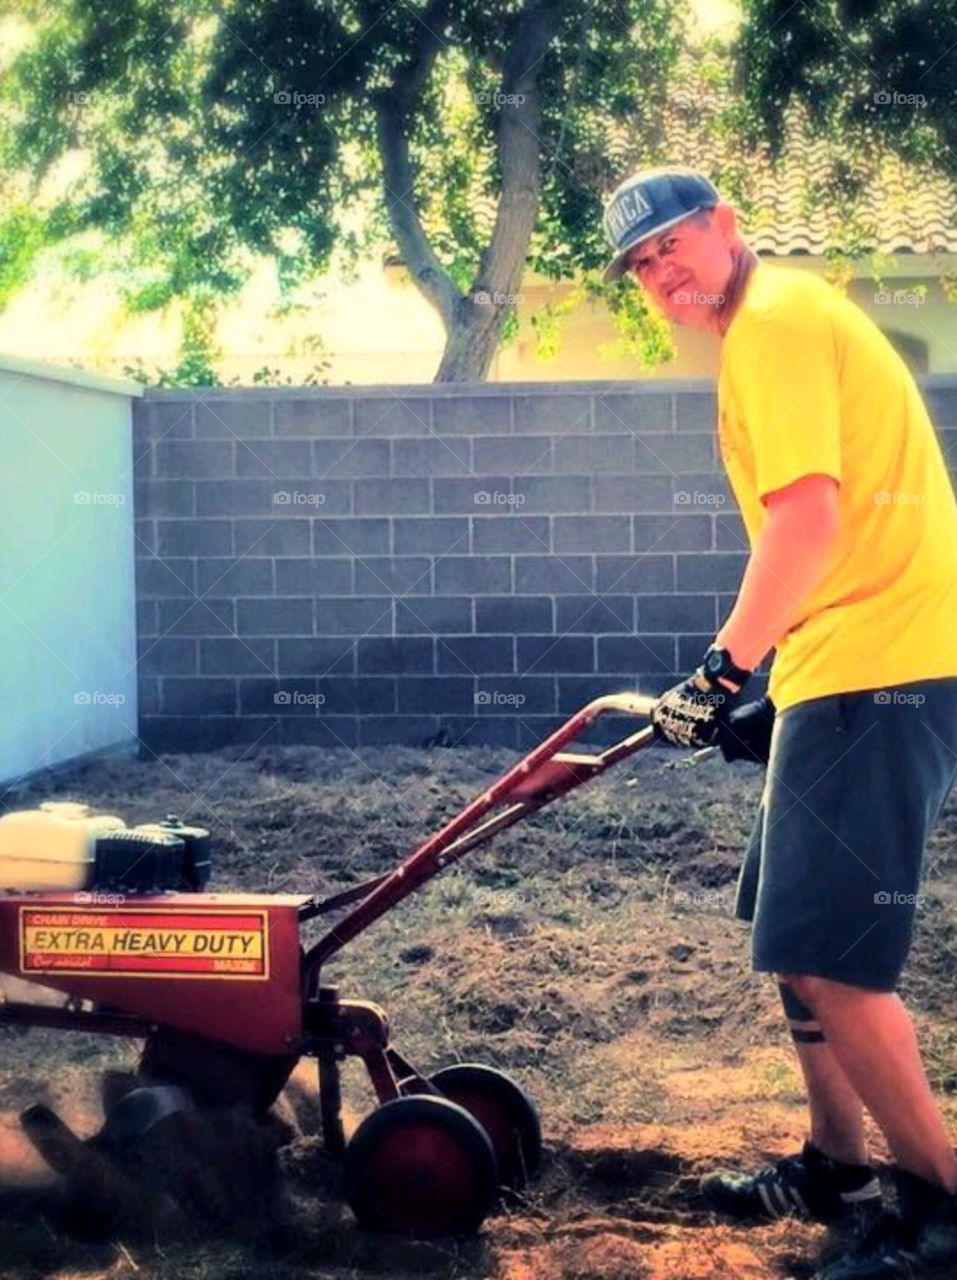 Yard work. Man and his rotter tiller